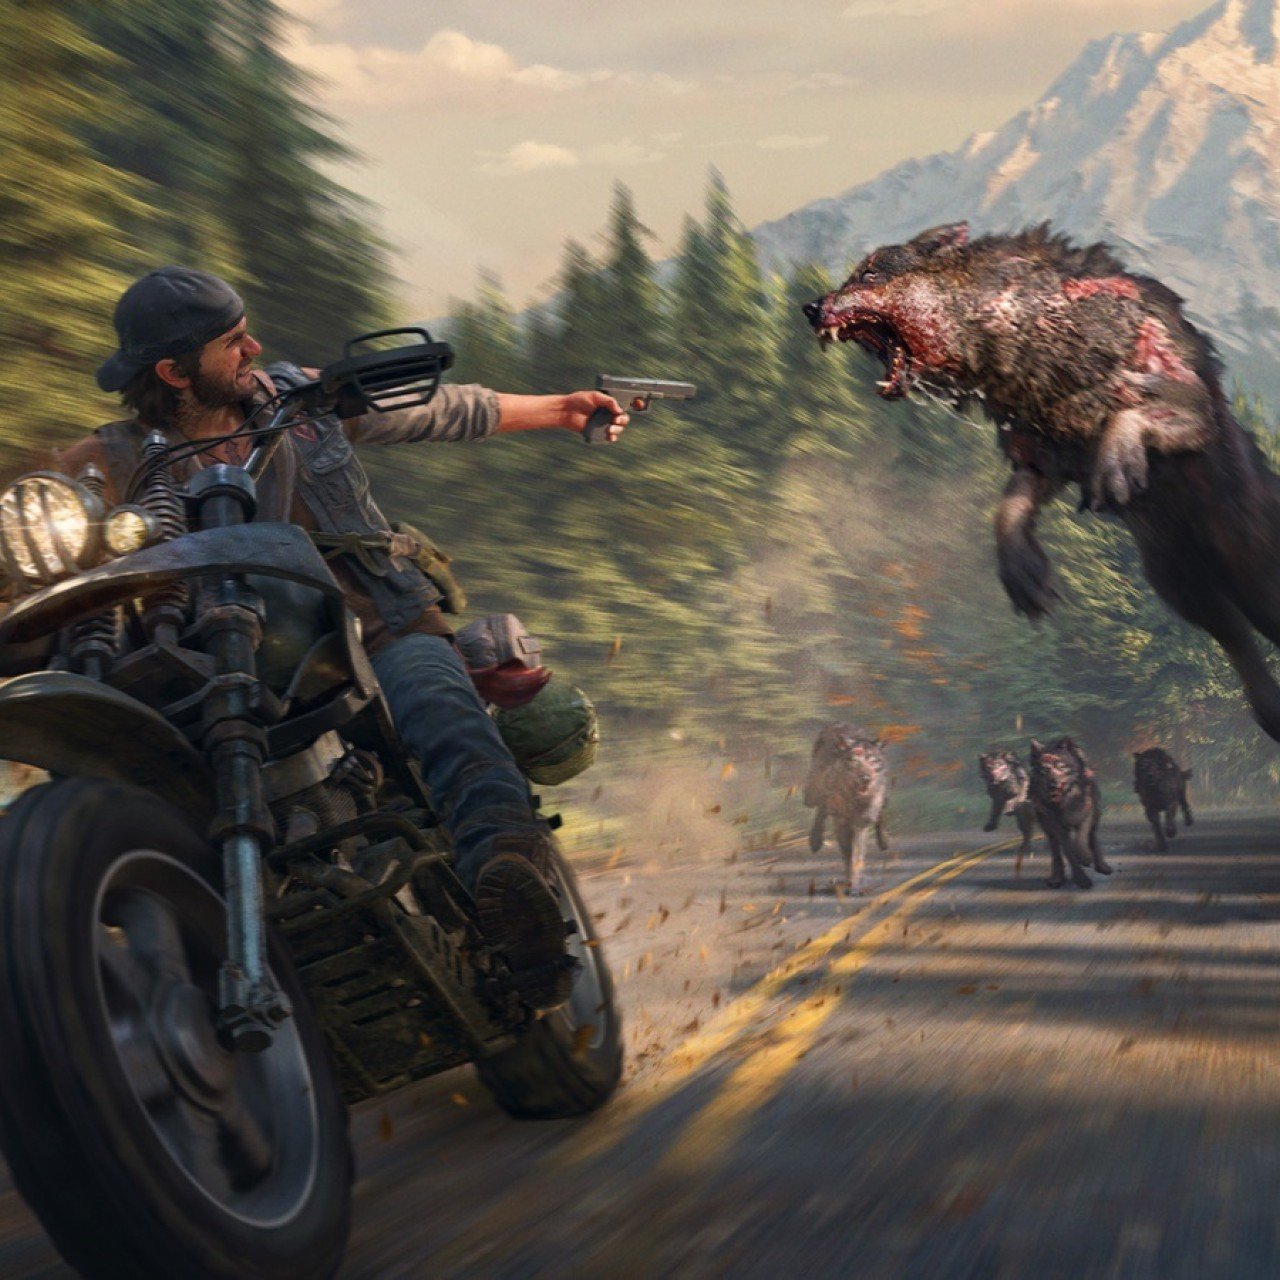 Days Gone' game review: PlayStation exclusive makes the zombie apocalypse  beautiful but routine - YP